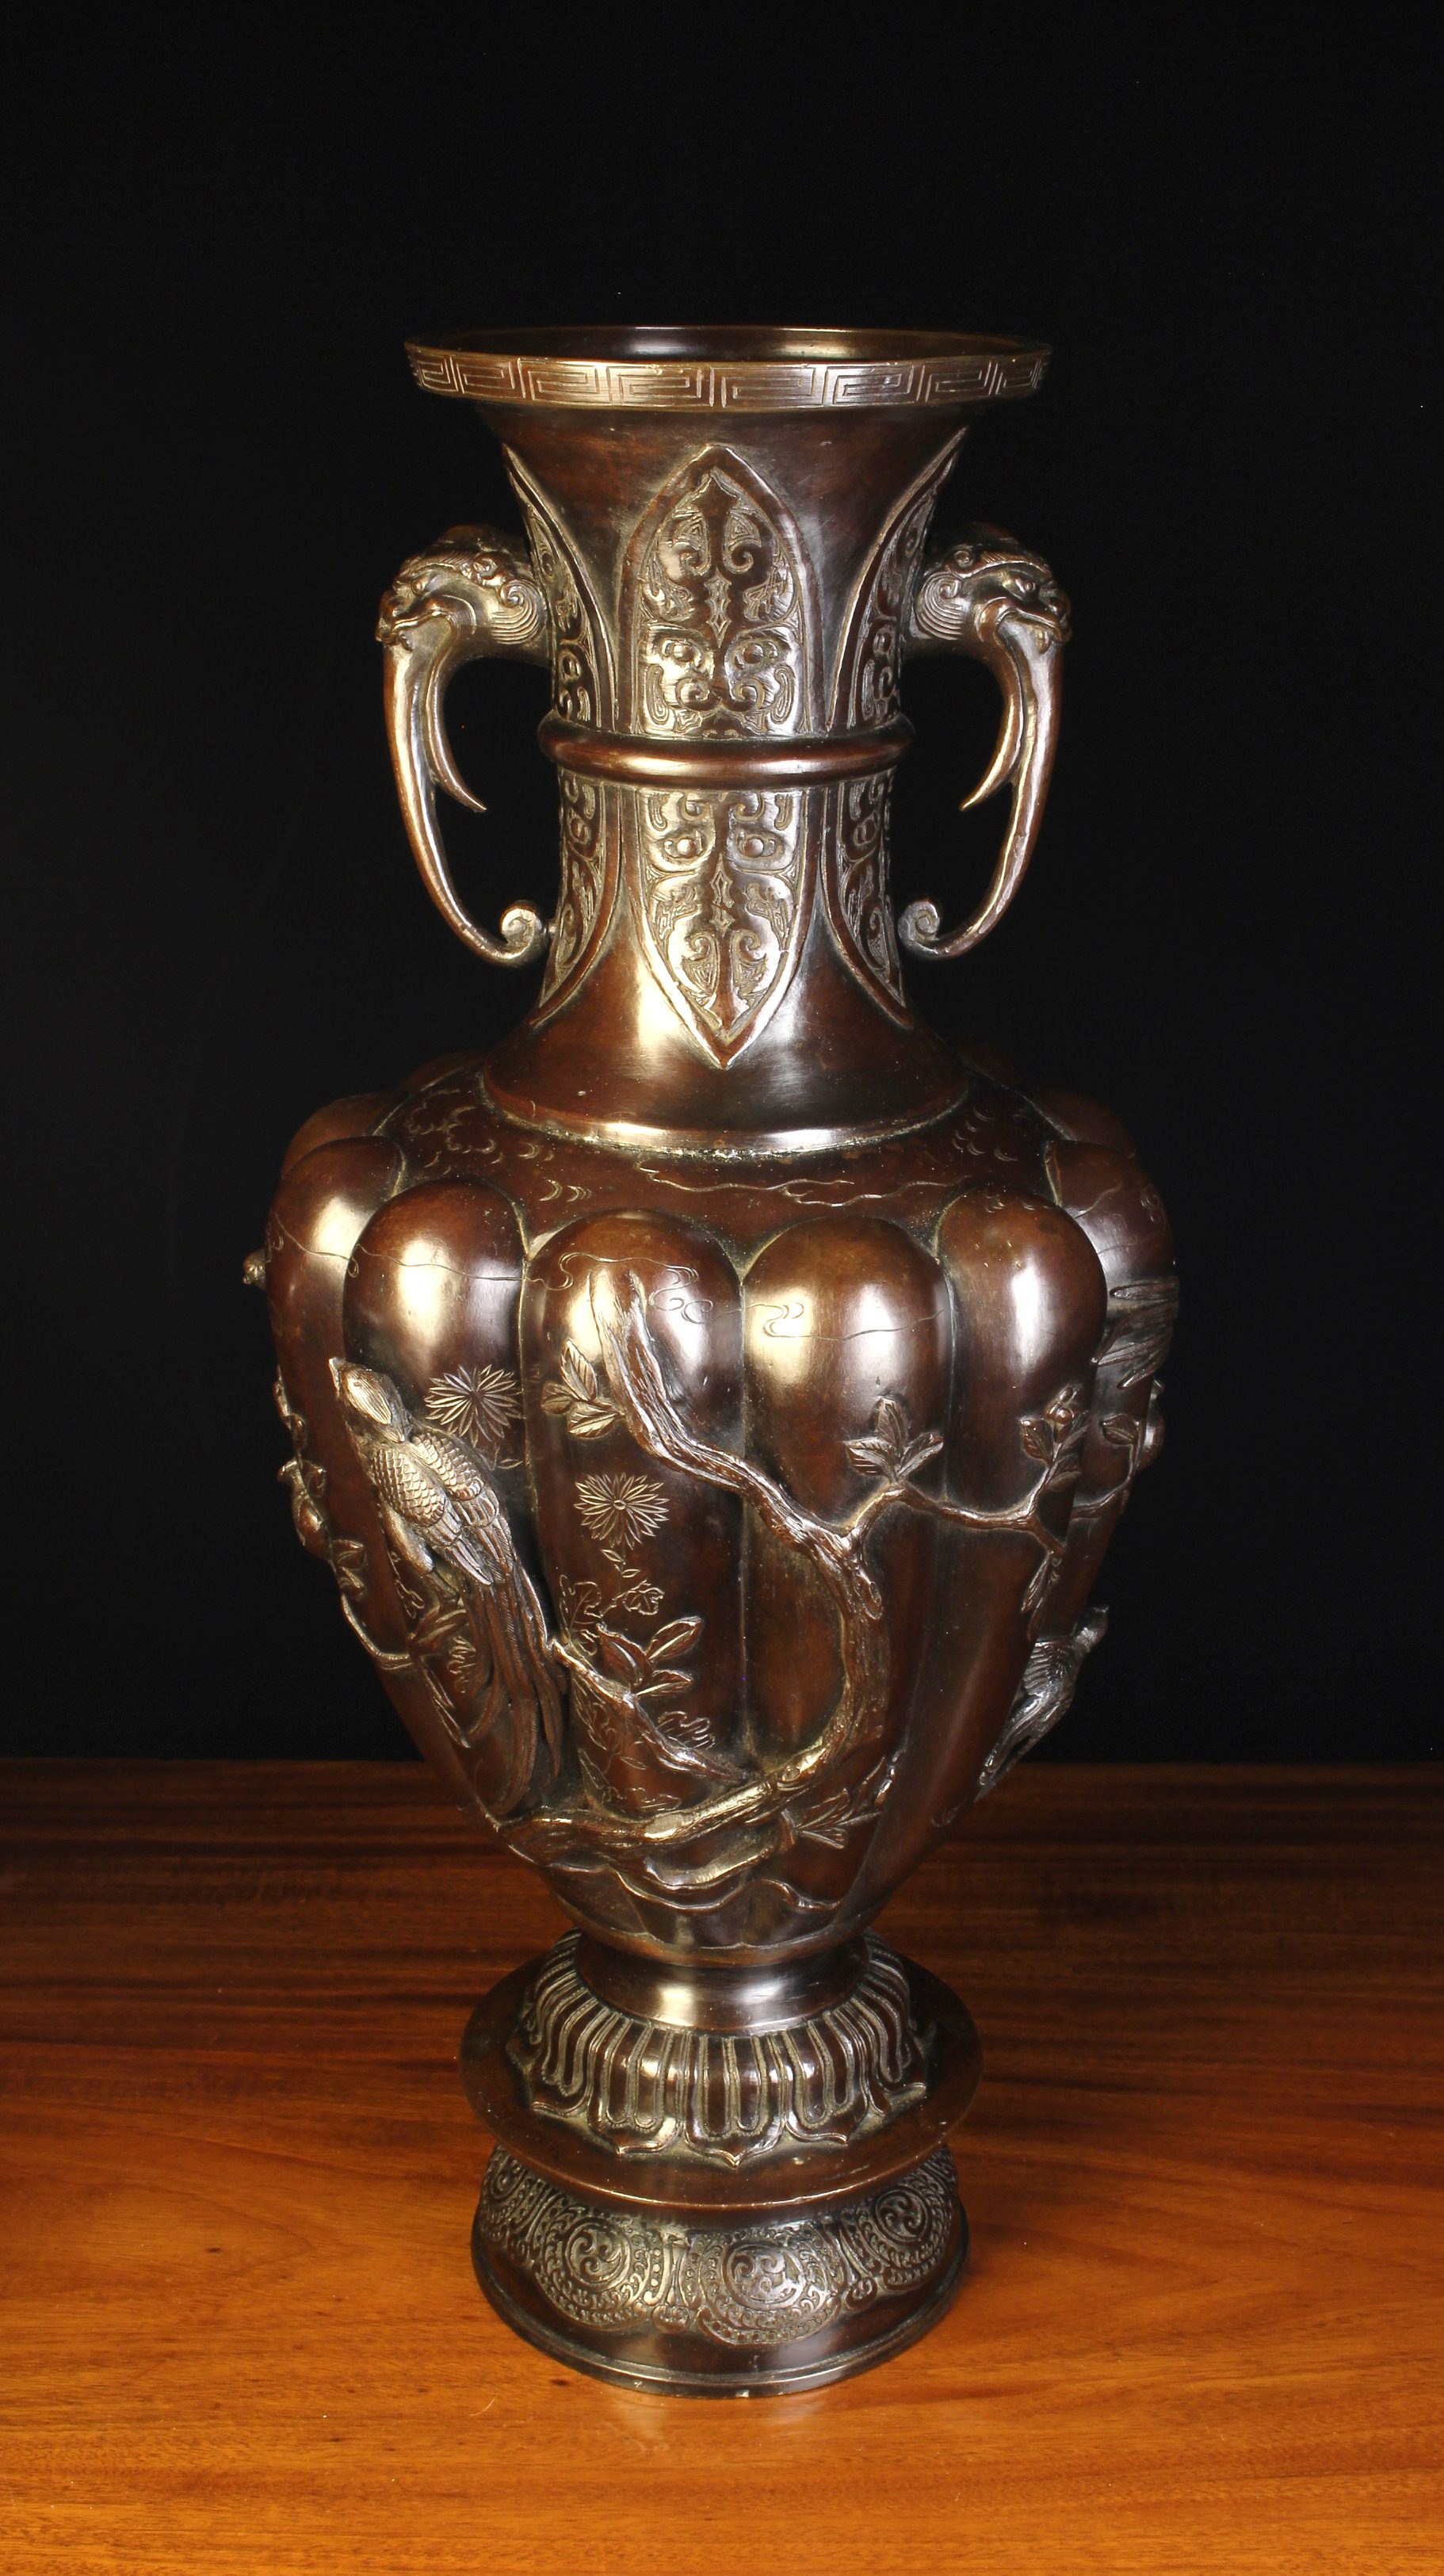 A Large 19th Century Japanese Brown Patinated Copper Alloy Vase.